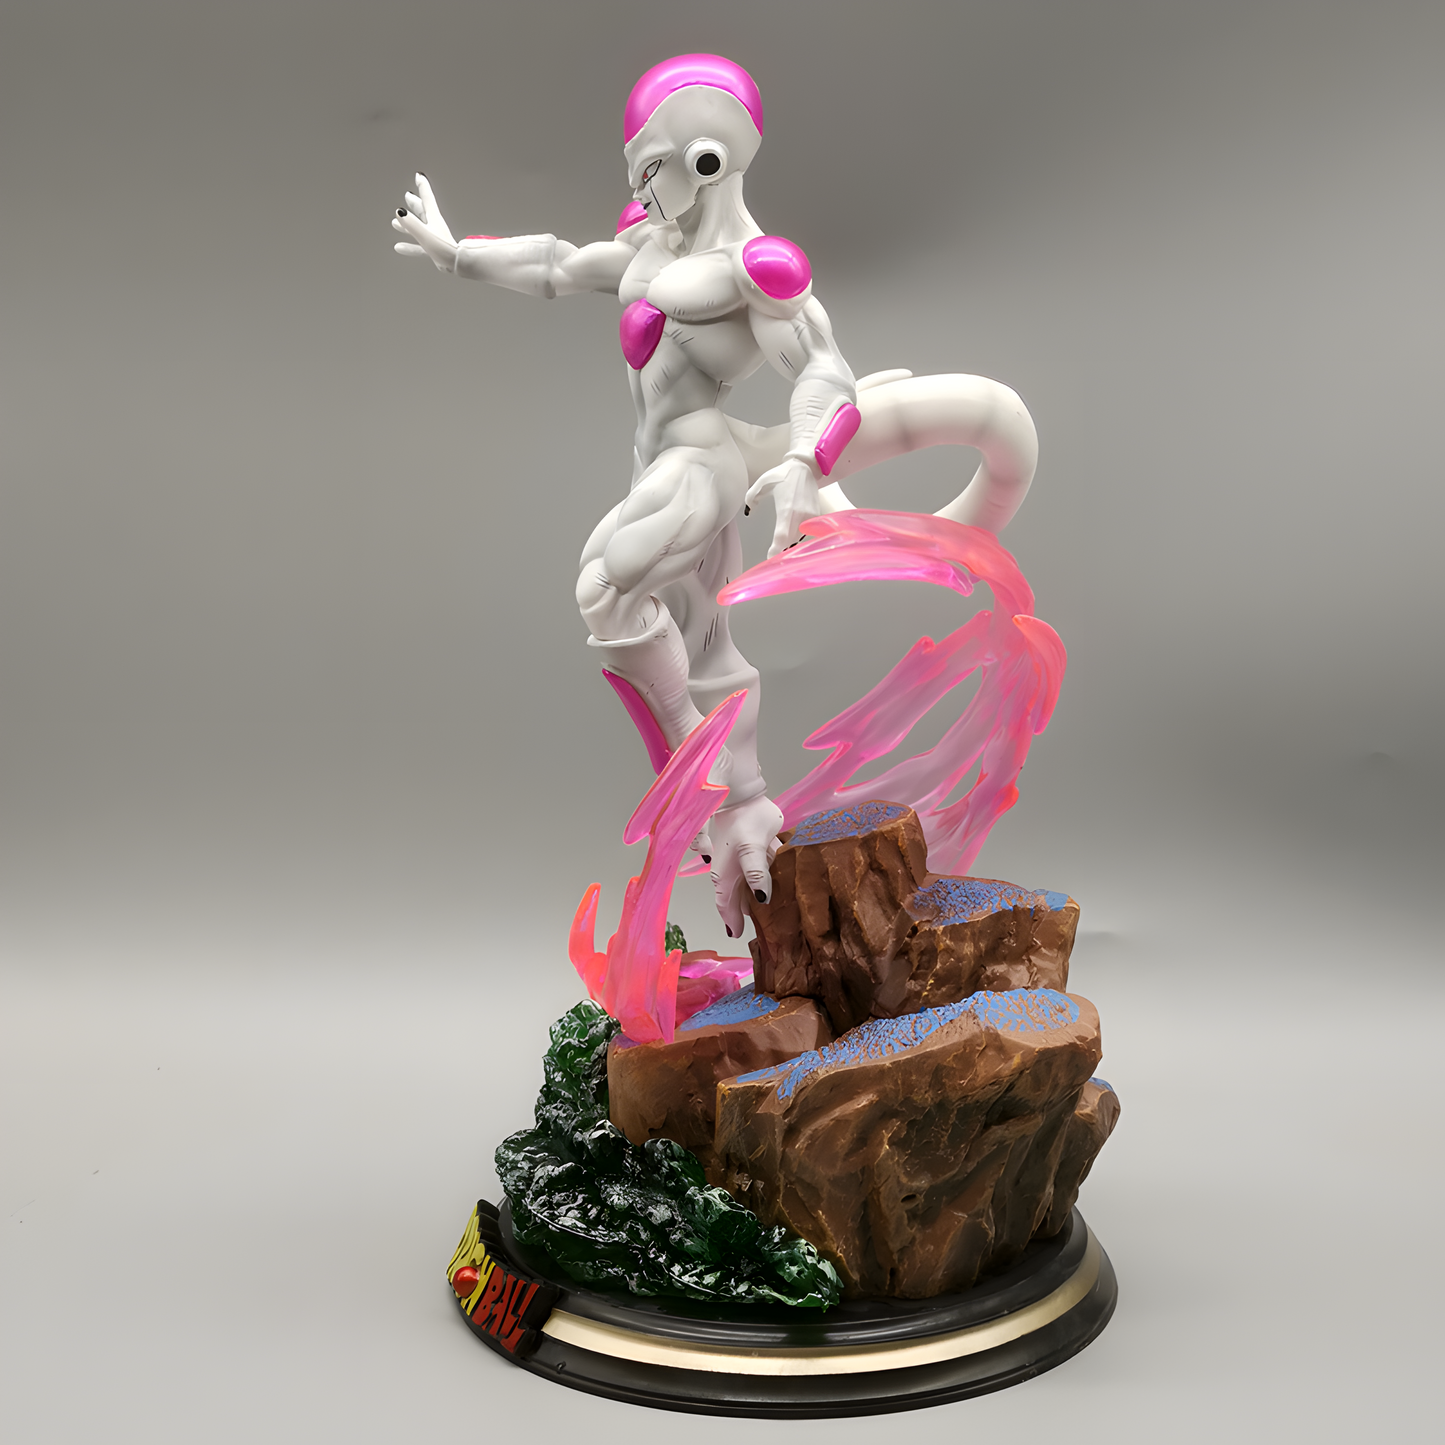 Frieza collectible statue captured mid-motion, with intense eyes and a raised hand ready to unleash power, surrounded by vivid pink energy effects.